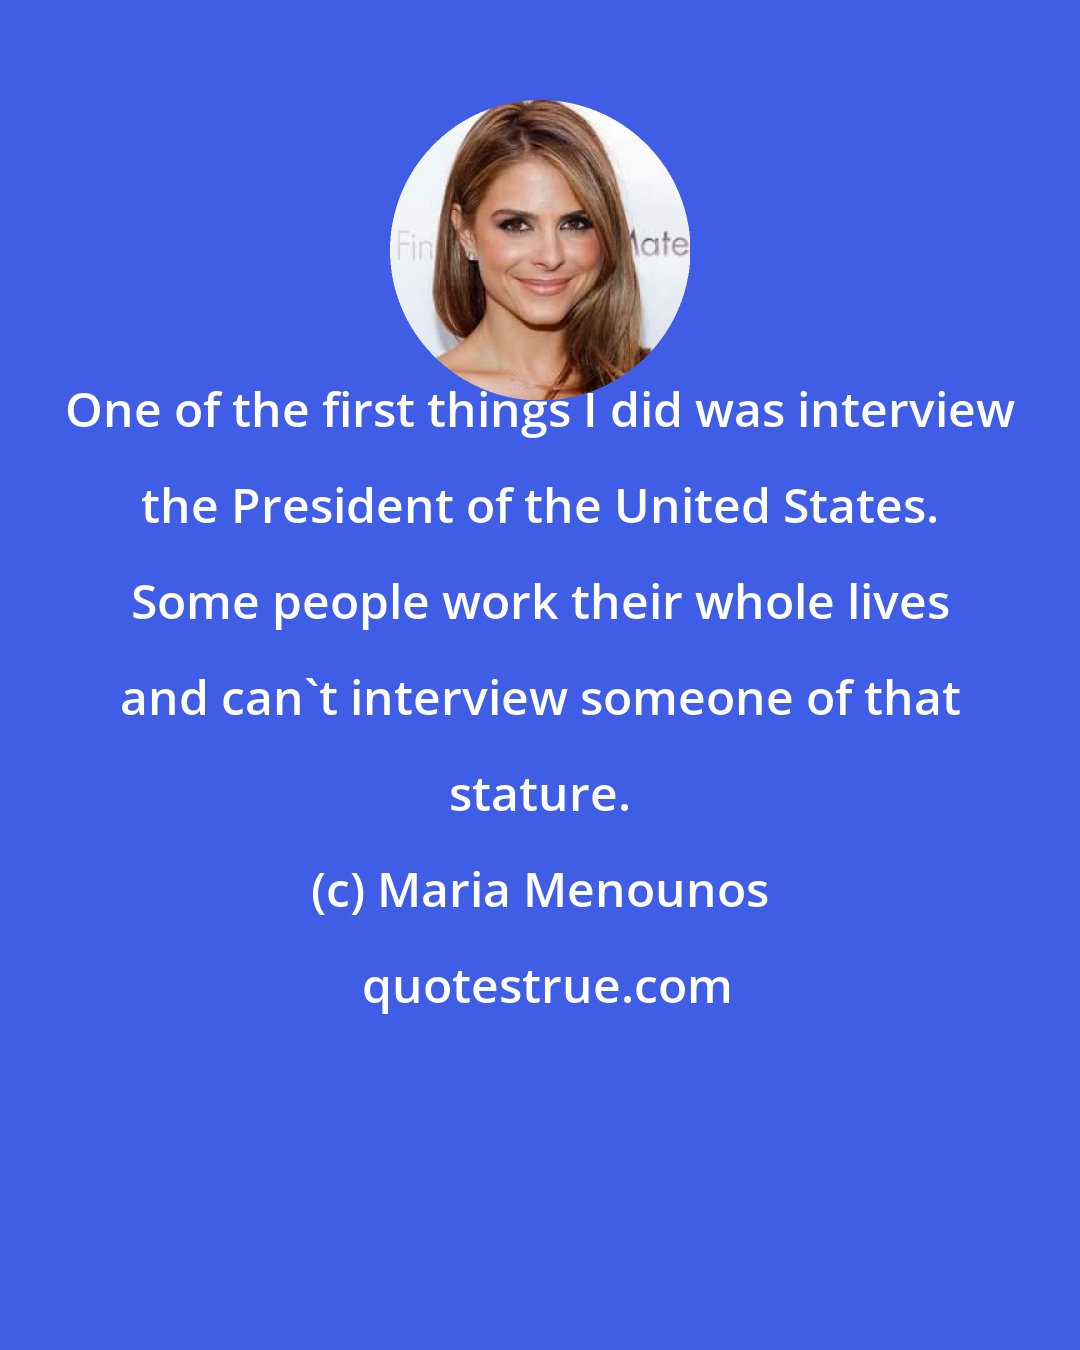 Maria Menounos: One of the first things I did was interview the President of the United States. Some people work their whole lives and can't interview someone of that stature.